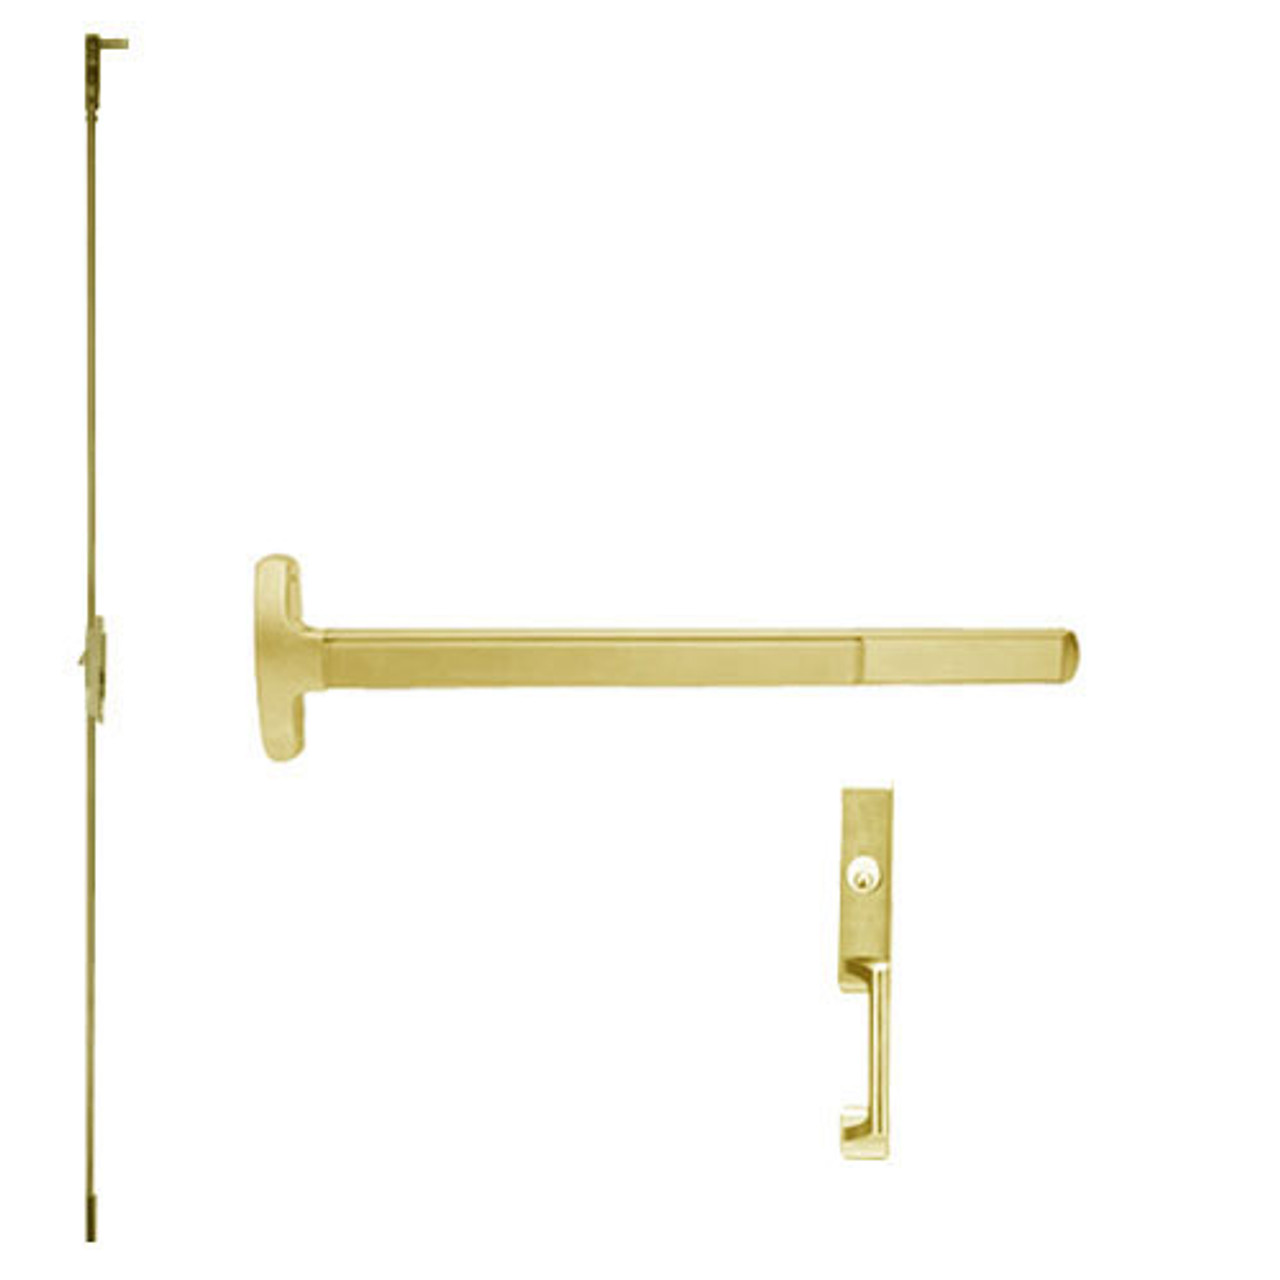 F-24-C-NL-US3-3-RHR Falcon Exit Device in Polished Brass